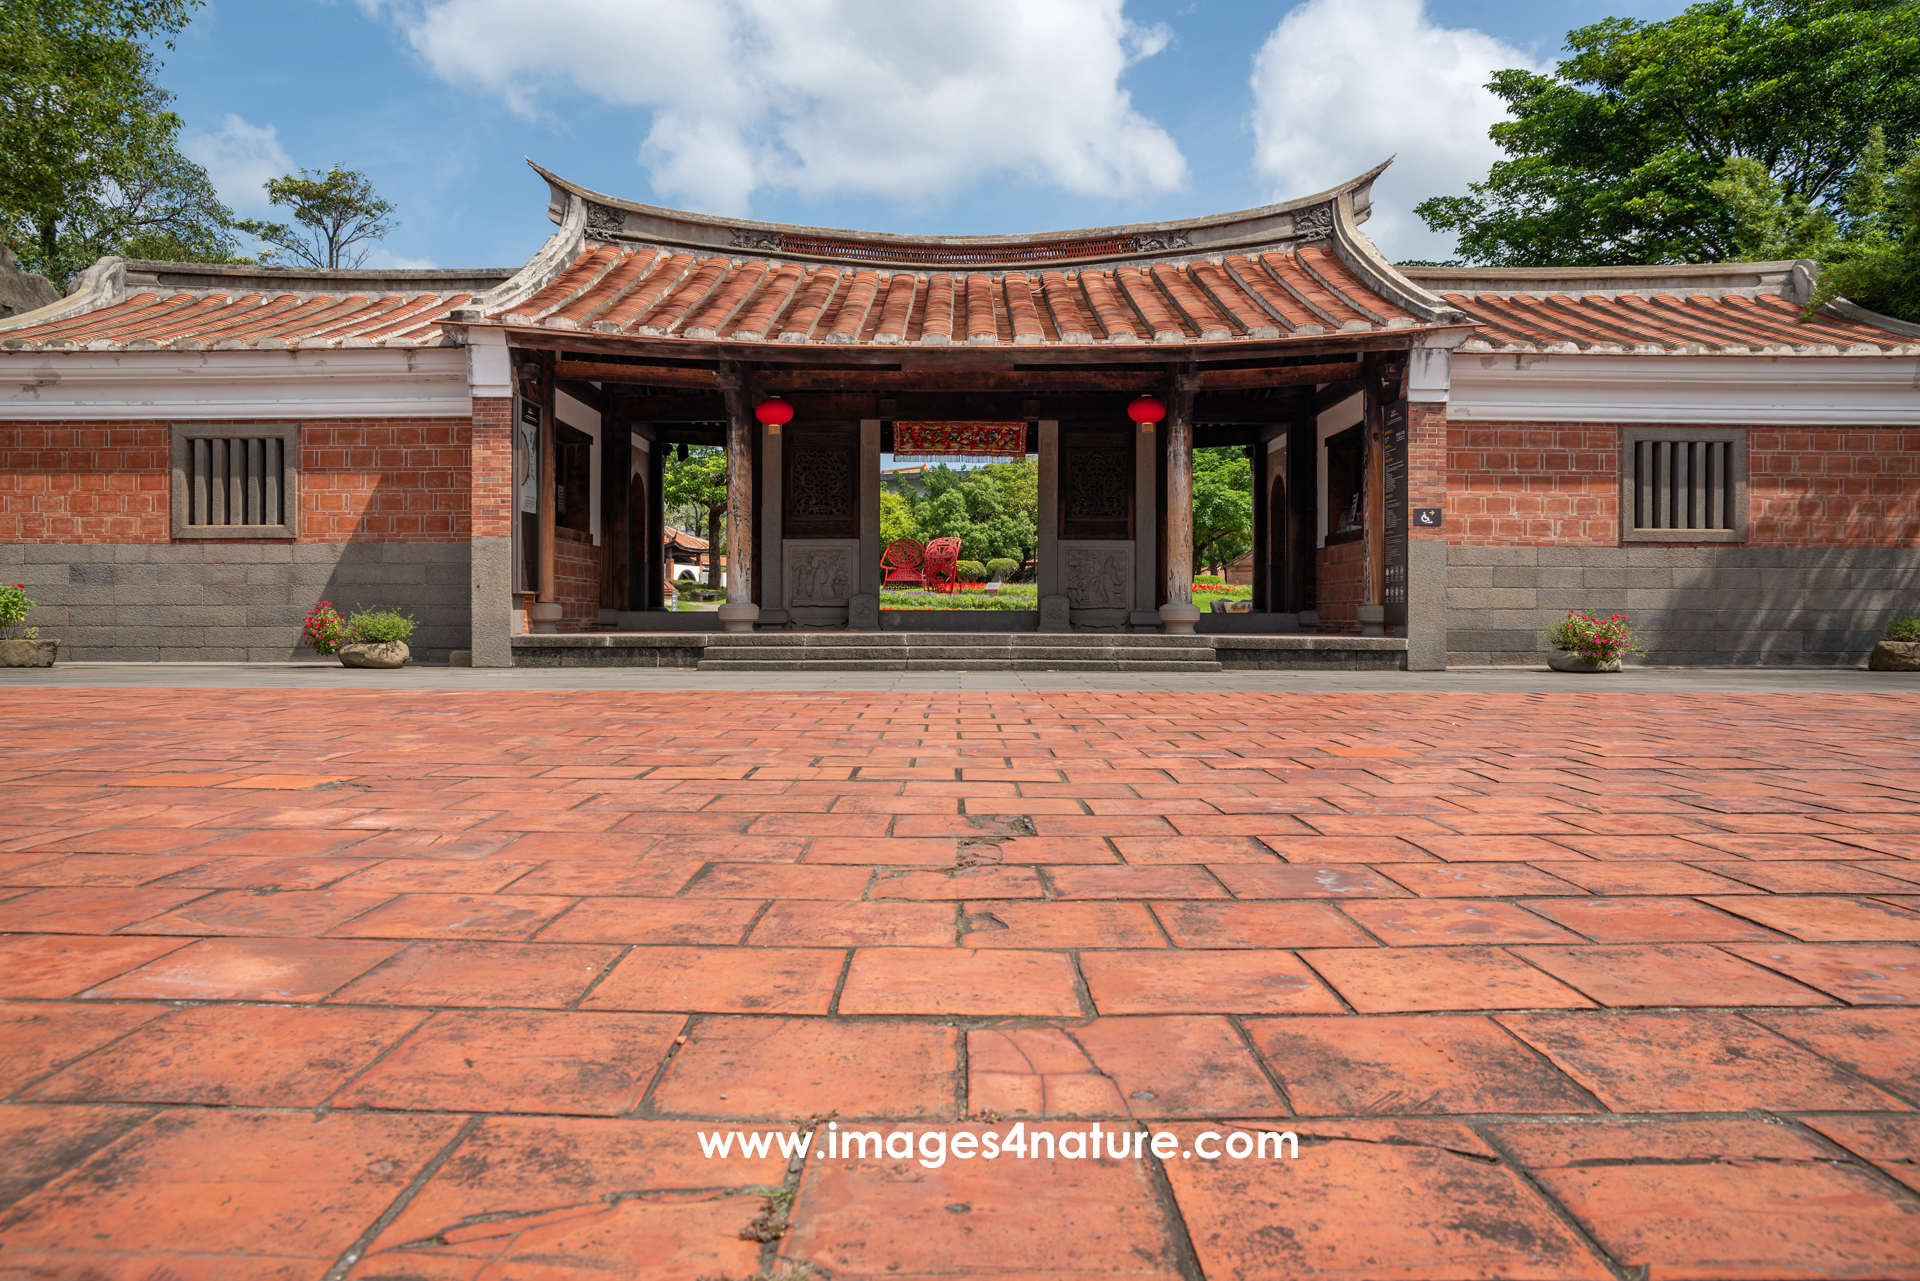 Low-angle view of the entrance of the traditional Chinese architecture Lin An Tai Historic House and Museum, with red tiles making up half of the image